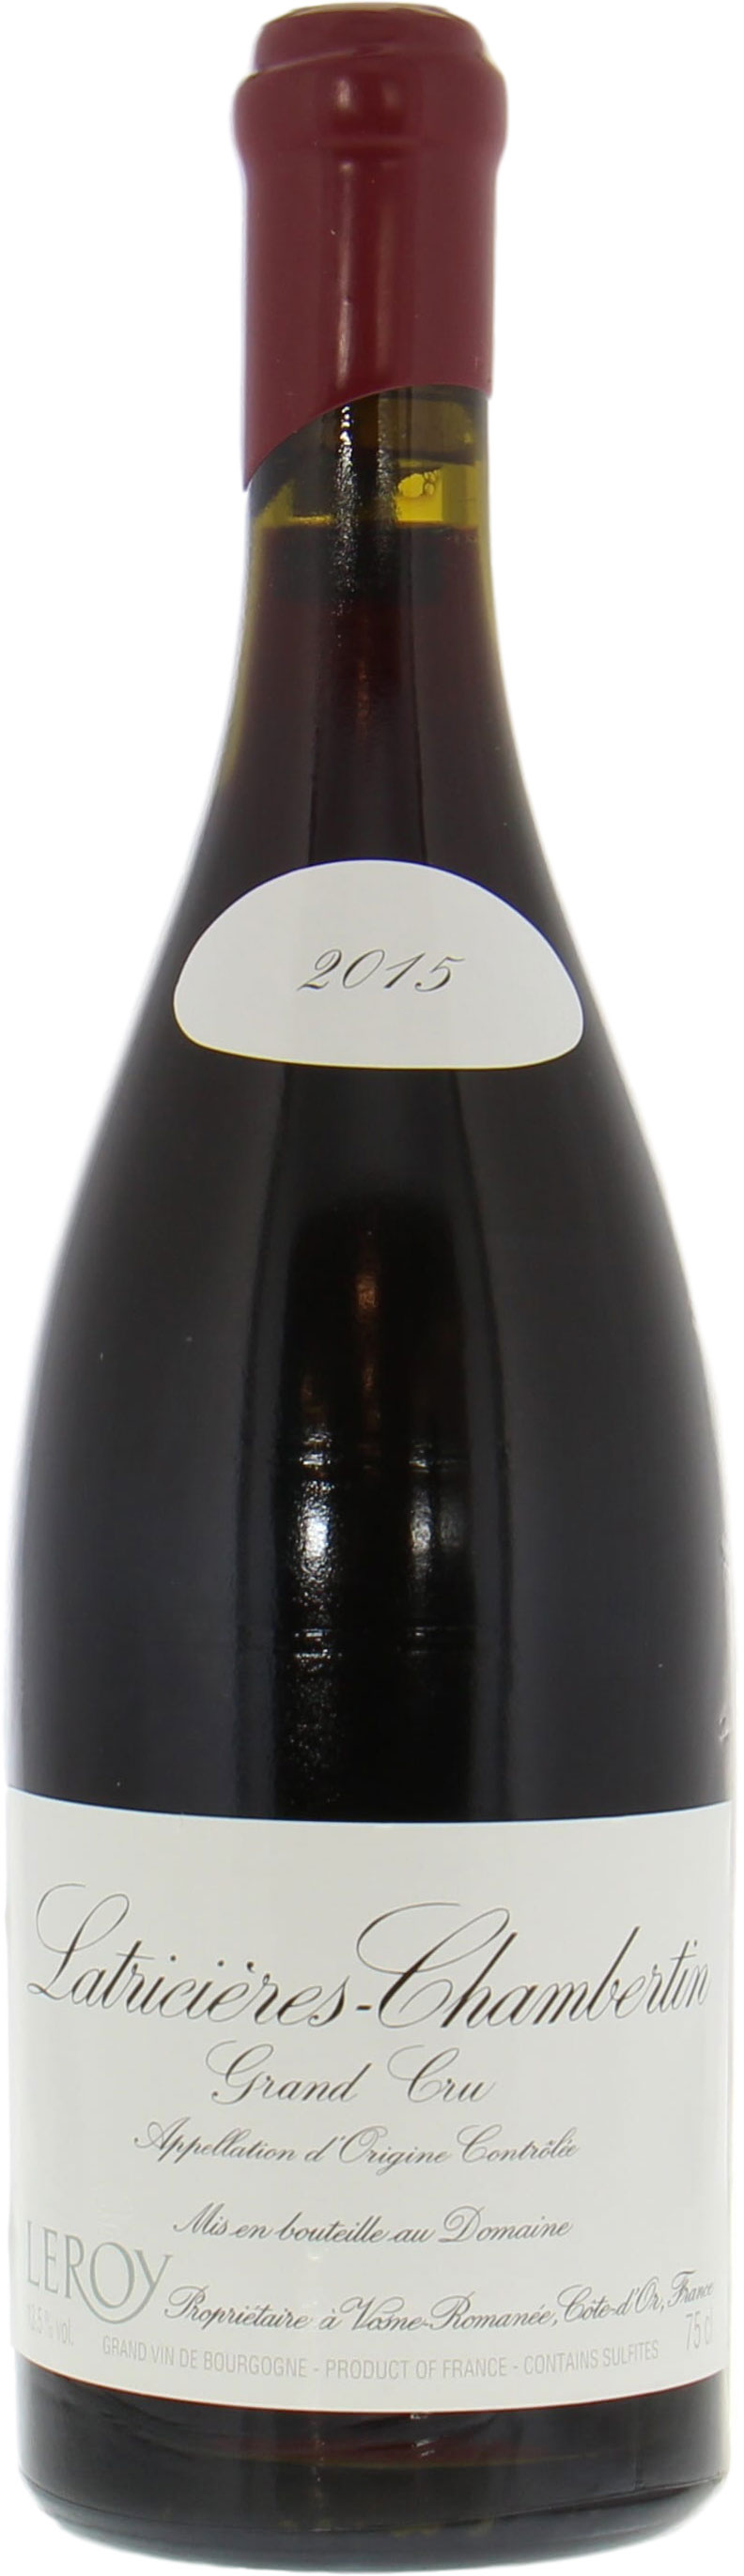 Domaine Leroy - Latricieres Chambertin 2015 From Original Wooden Case